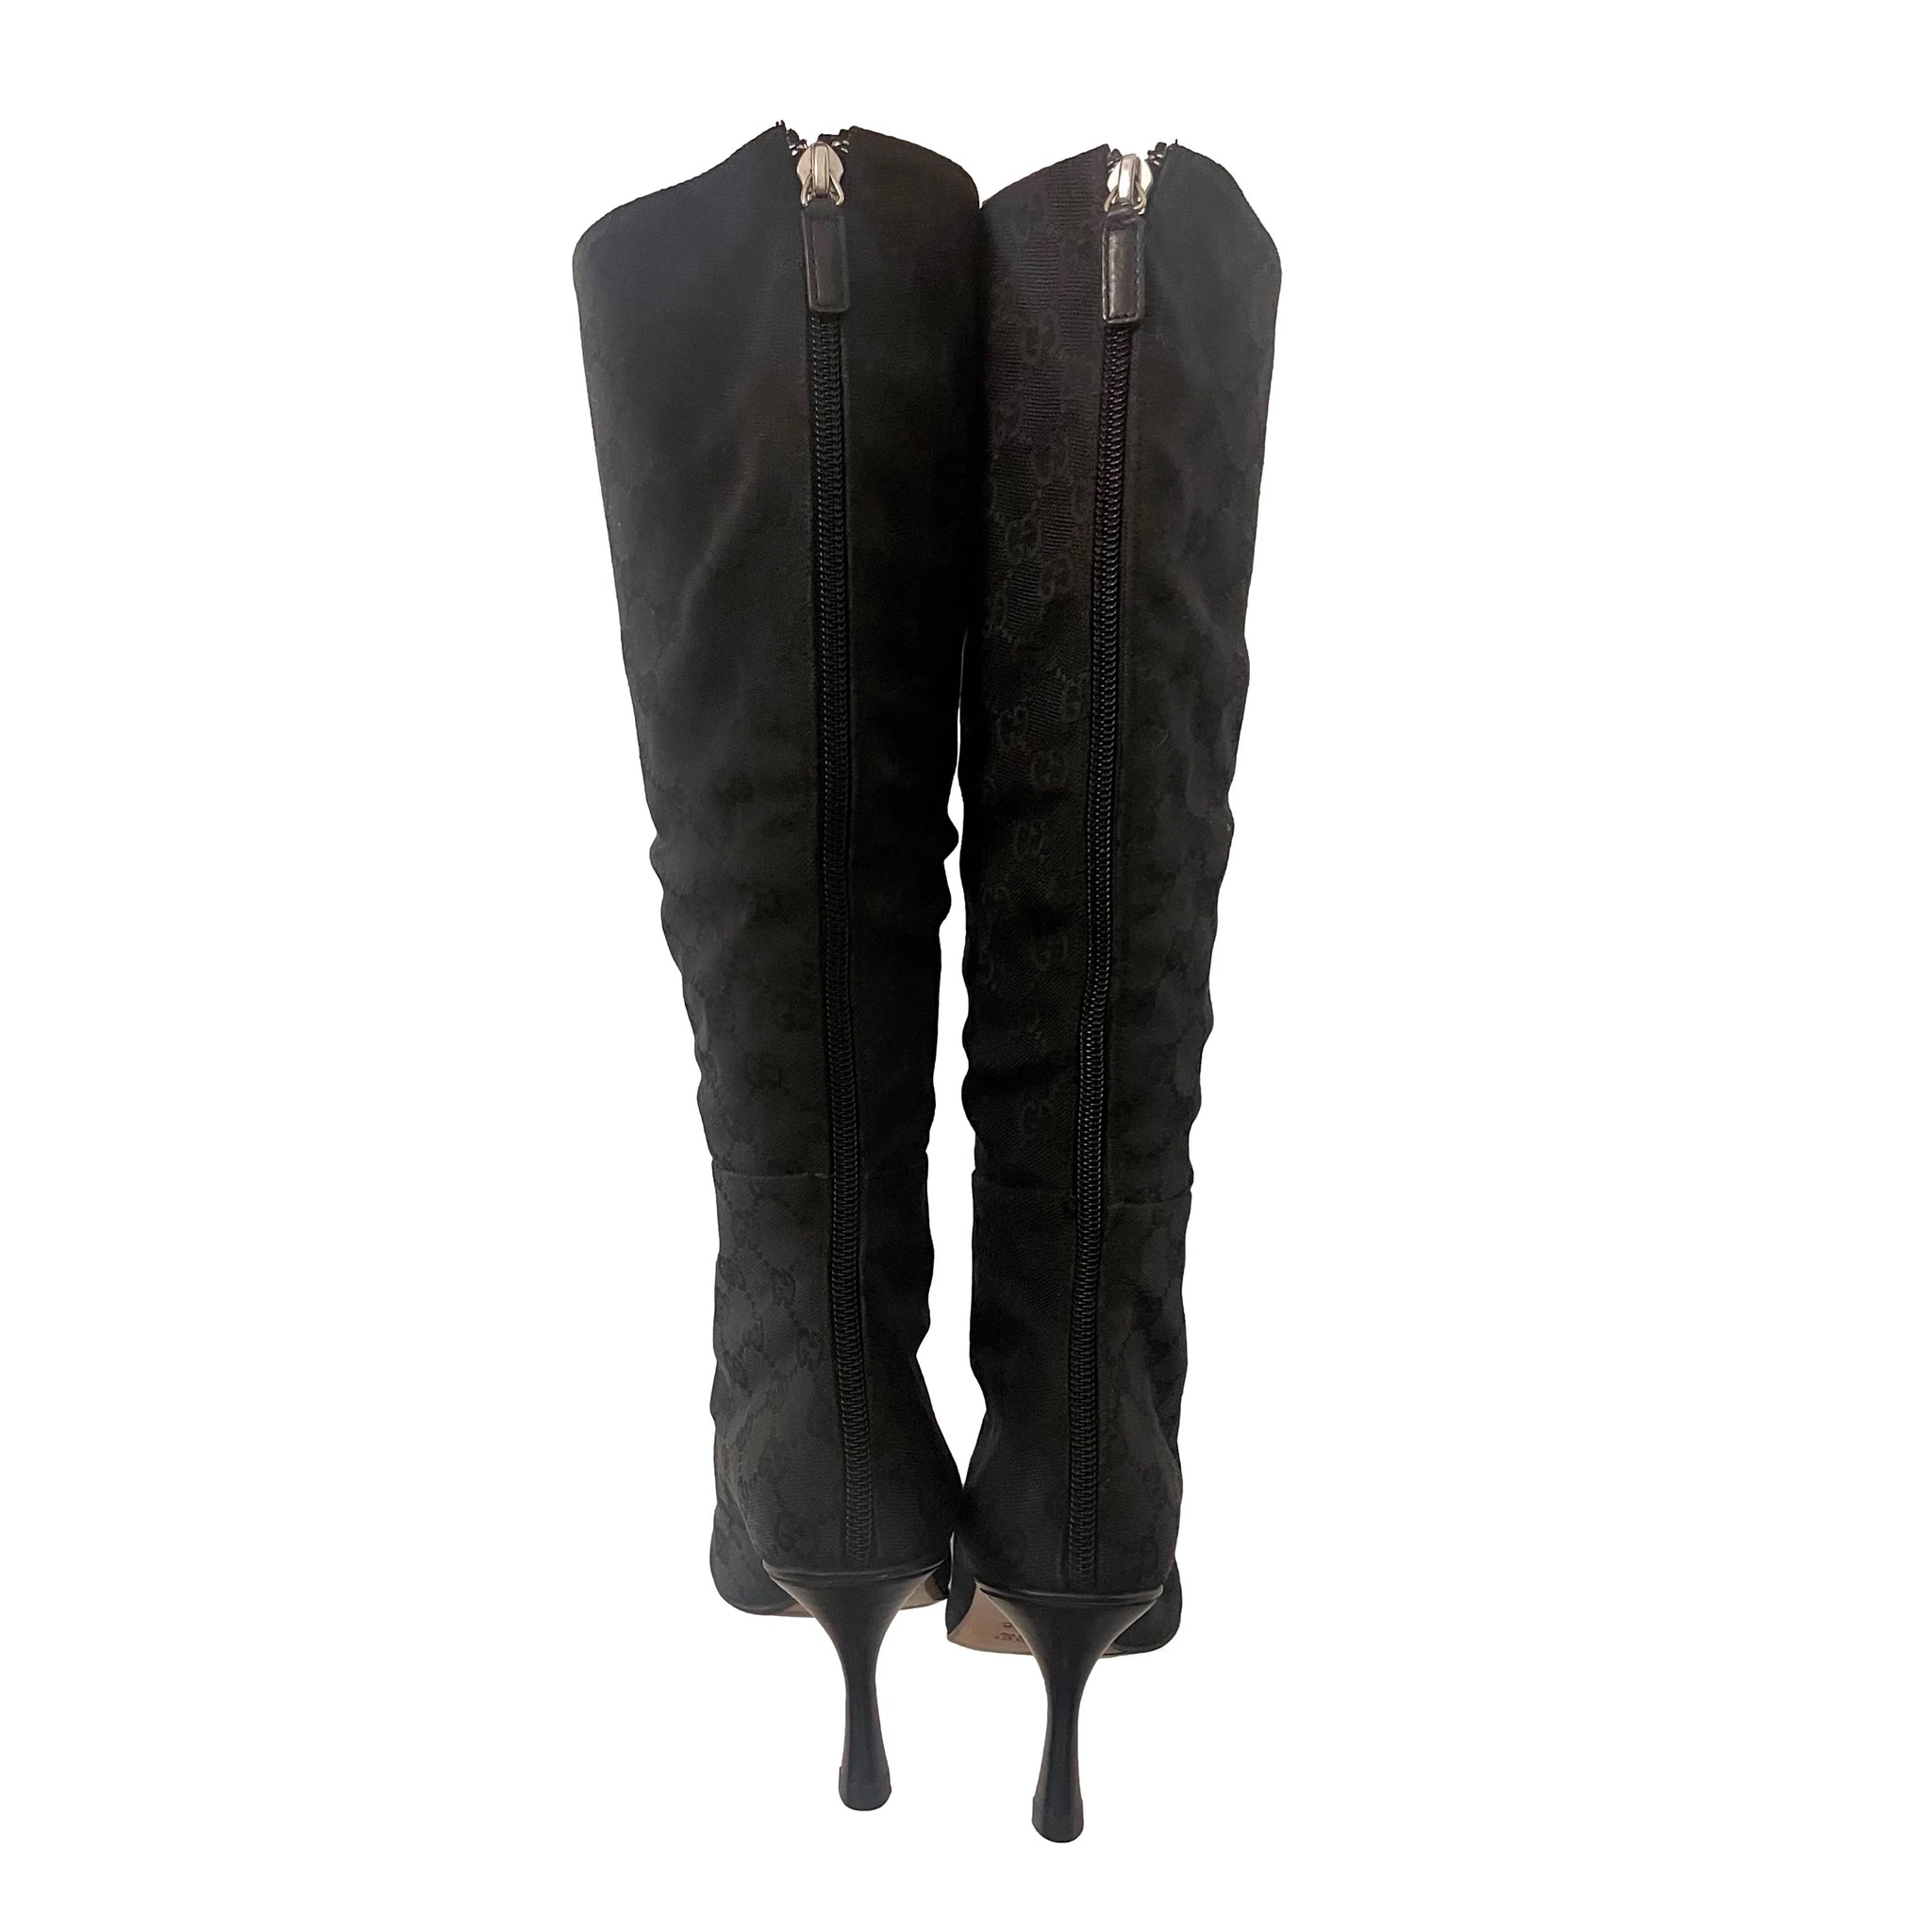 Black Gucci Pointed-Toe Suede Knee-High Boots Size 39 – Designer Revival